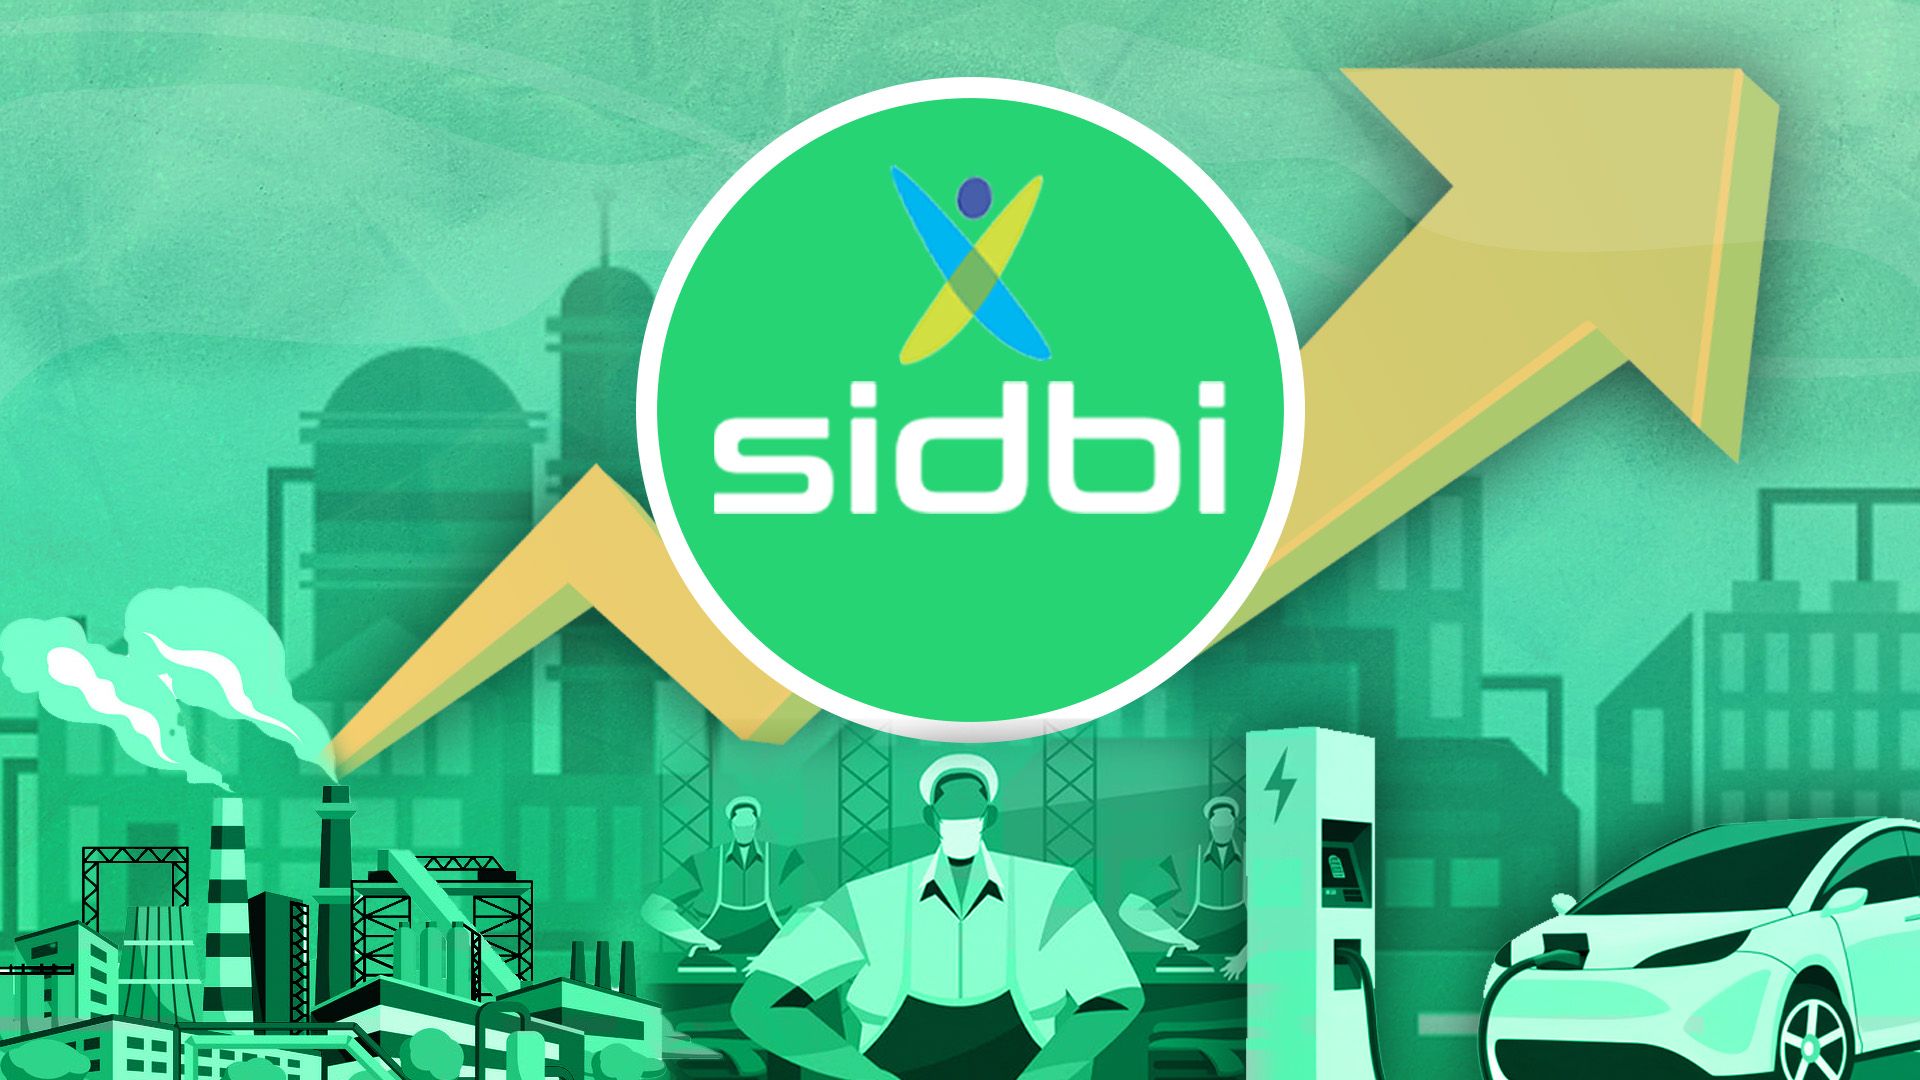 SIDBI plans to raise Rs 5,000 Cr via rights issue next financial year